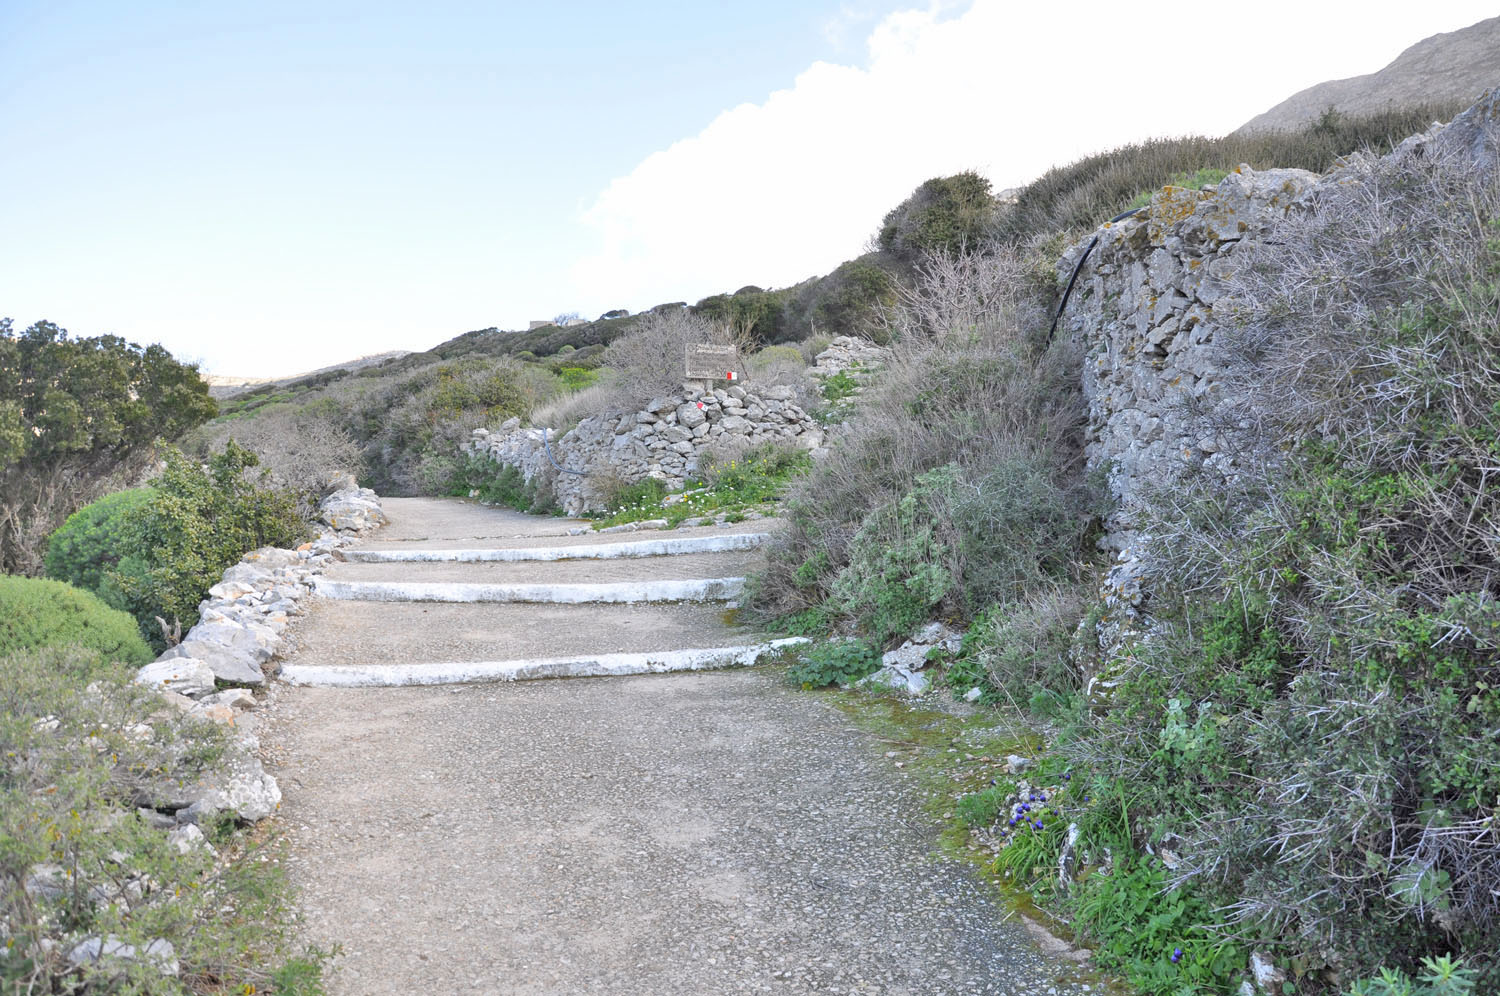 In the end of the land sign the path to Teologos